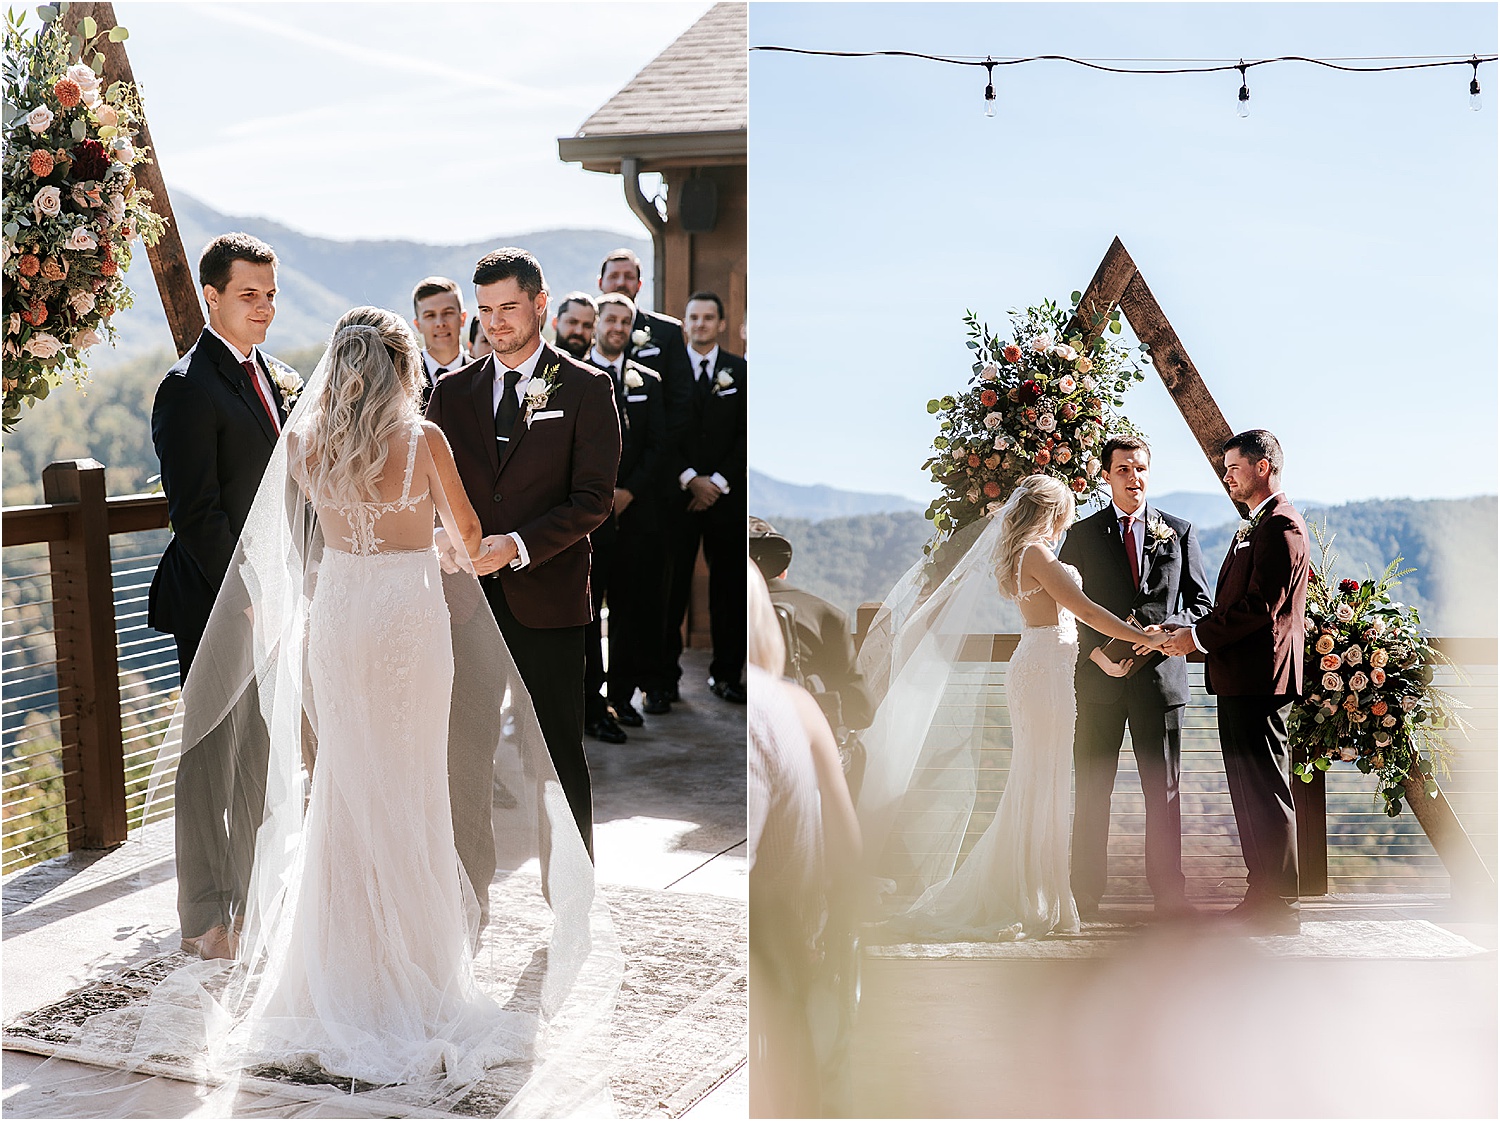 sun-kissed wedding ceremony in the mountains